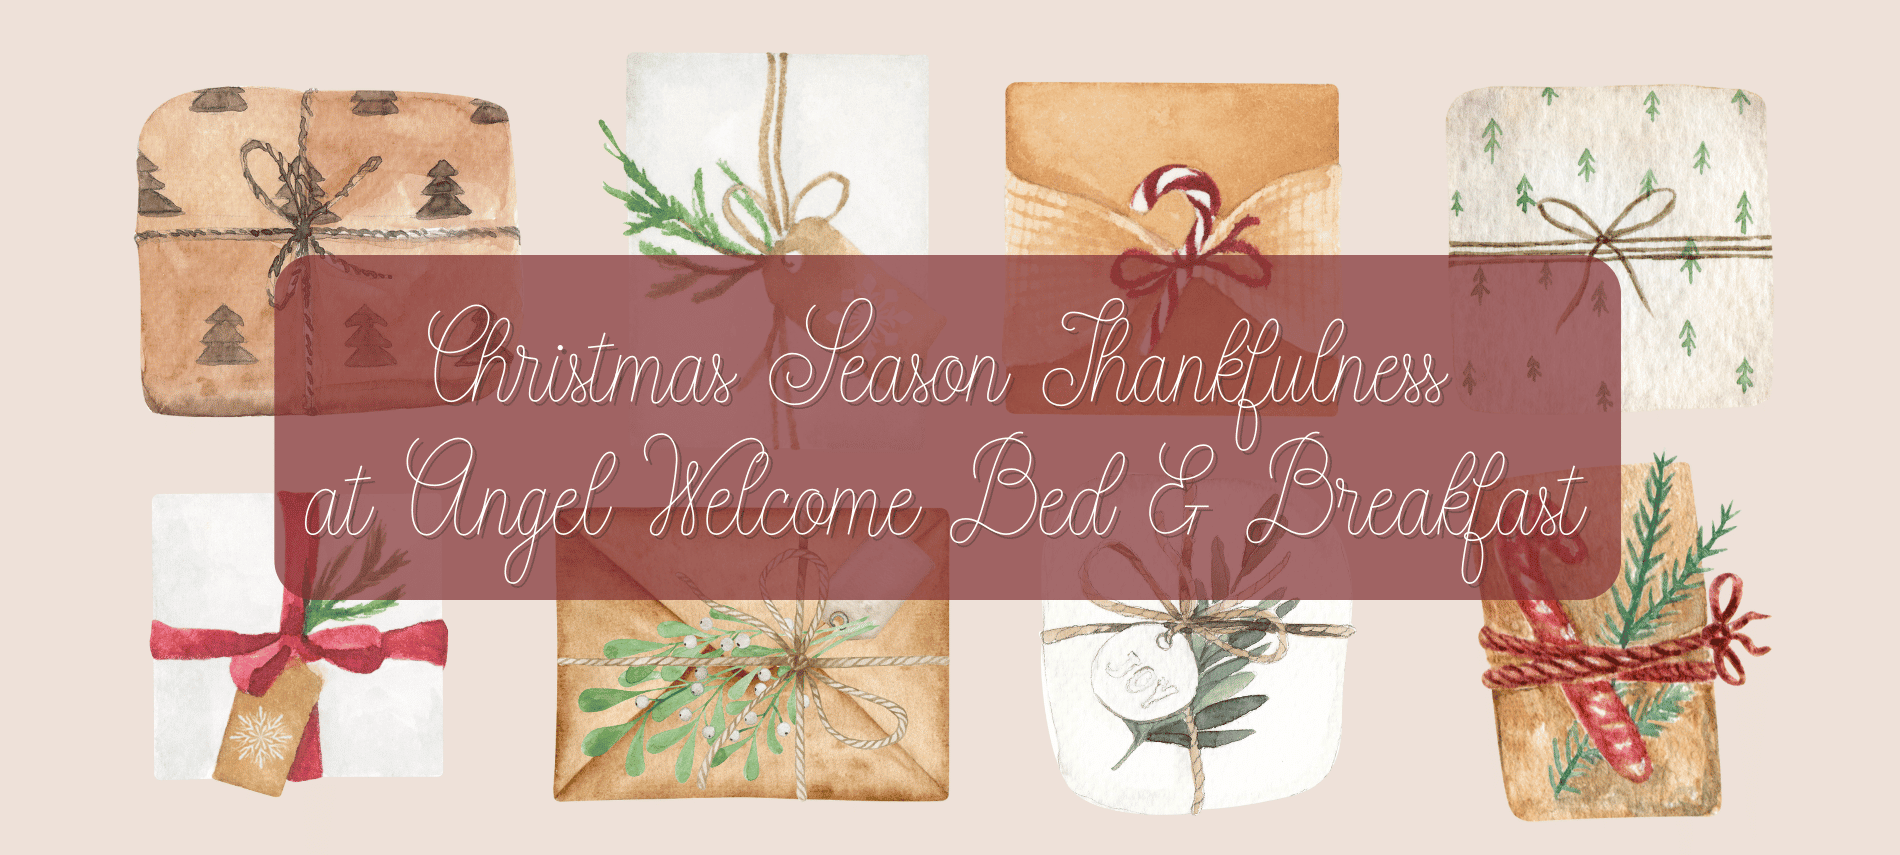 Background of rustic Christmas gifts with text: Christmas Season Thankfulness at Angel Welcome Bed & Breakfast